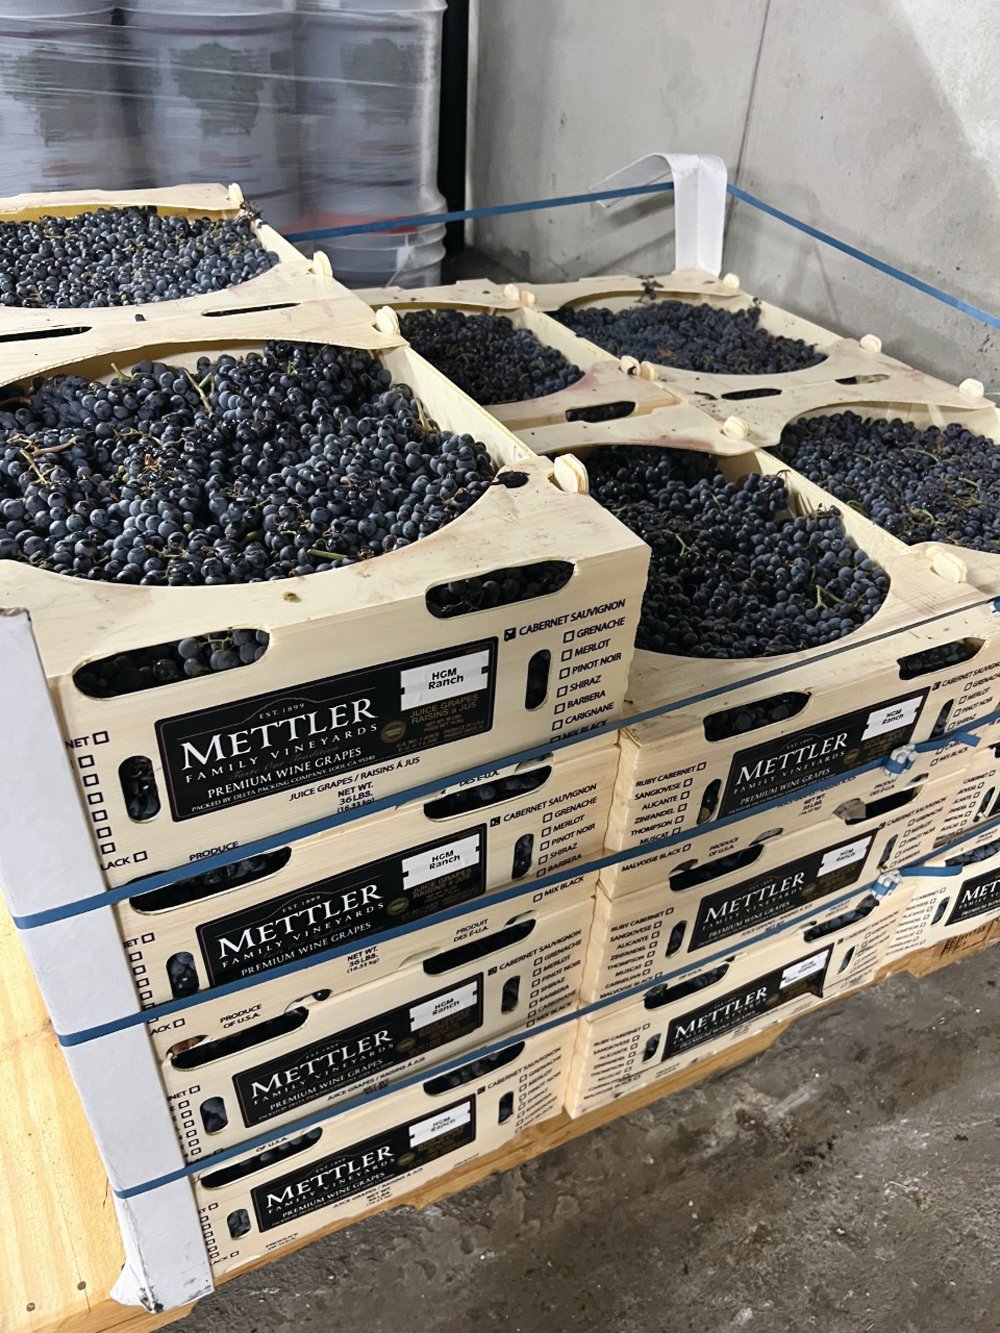 VARIETY OF GRAPES: Moretti purchases a variety of red and white grapes to make different types of wines. Here he has Cabernet Sauvignon.